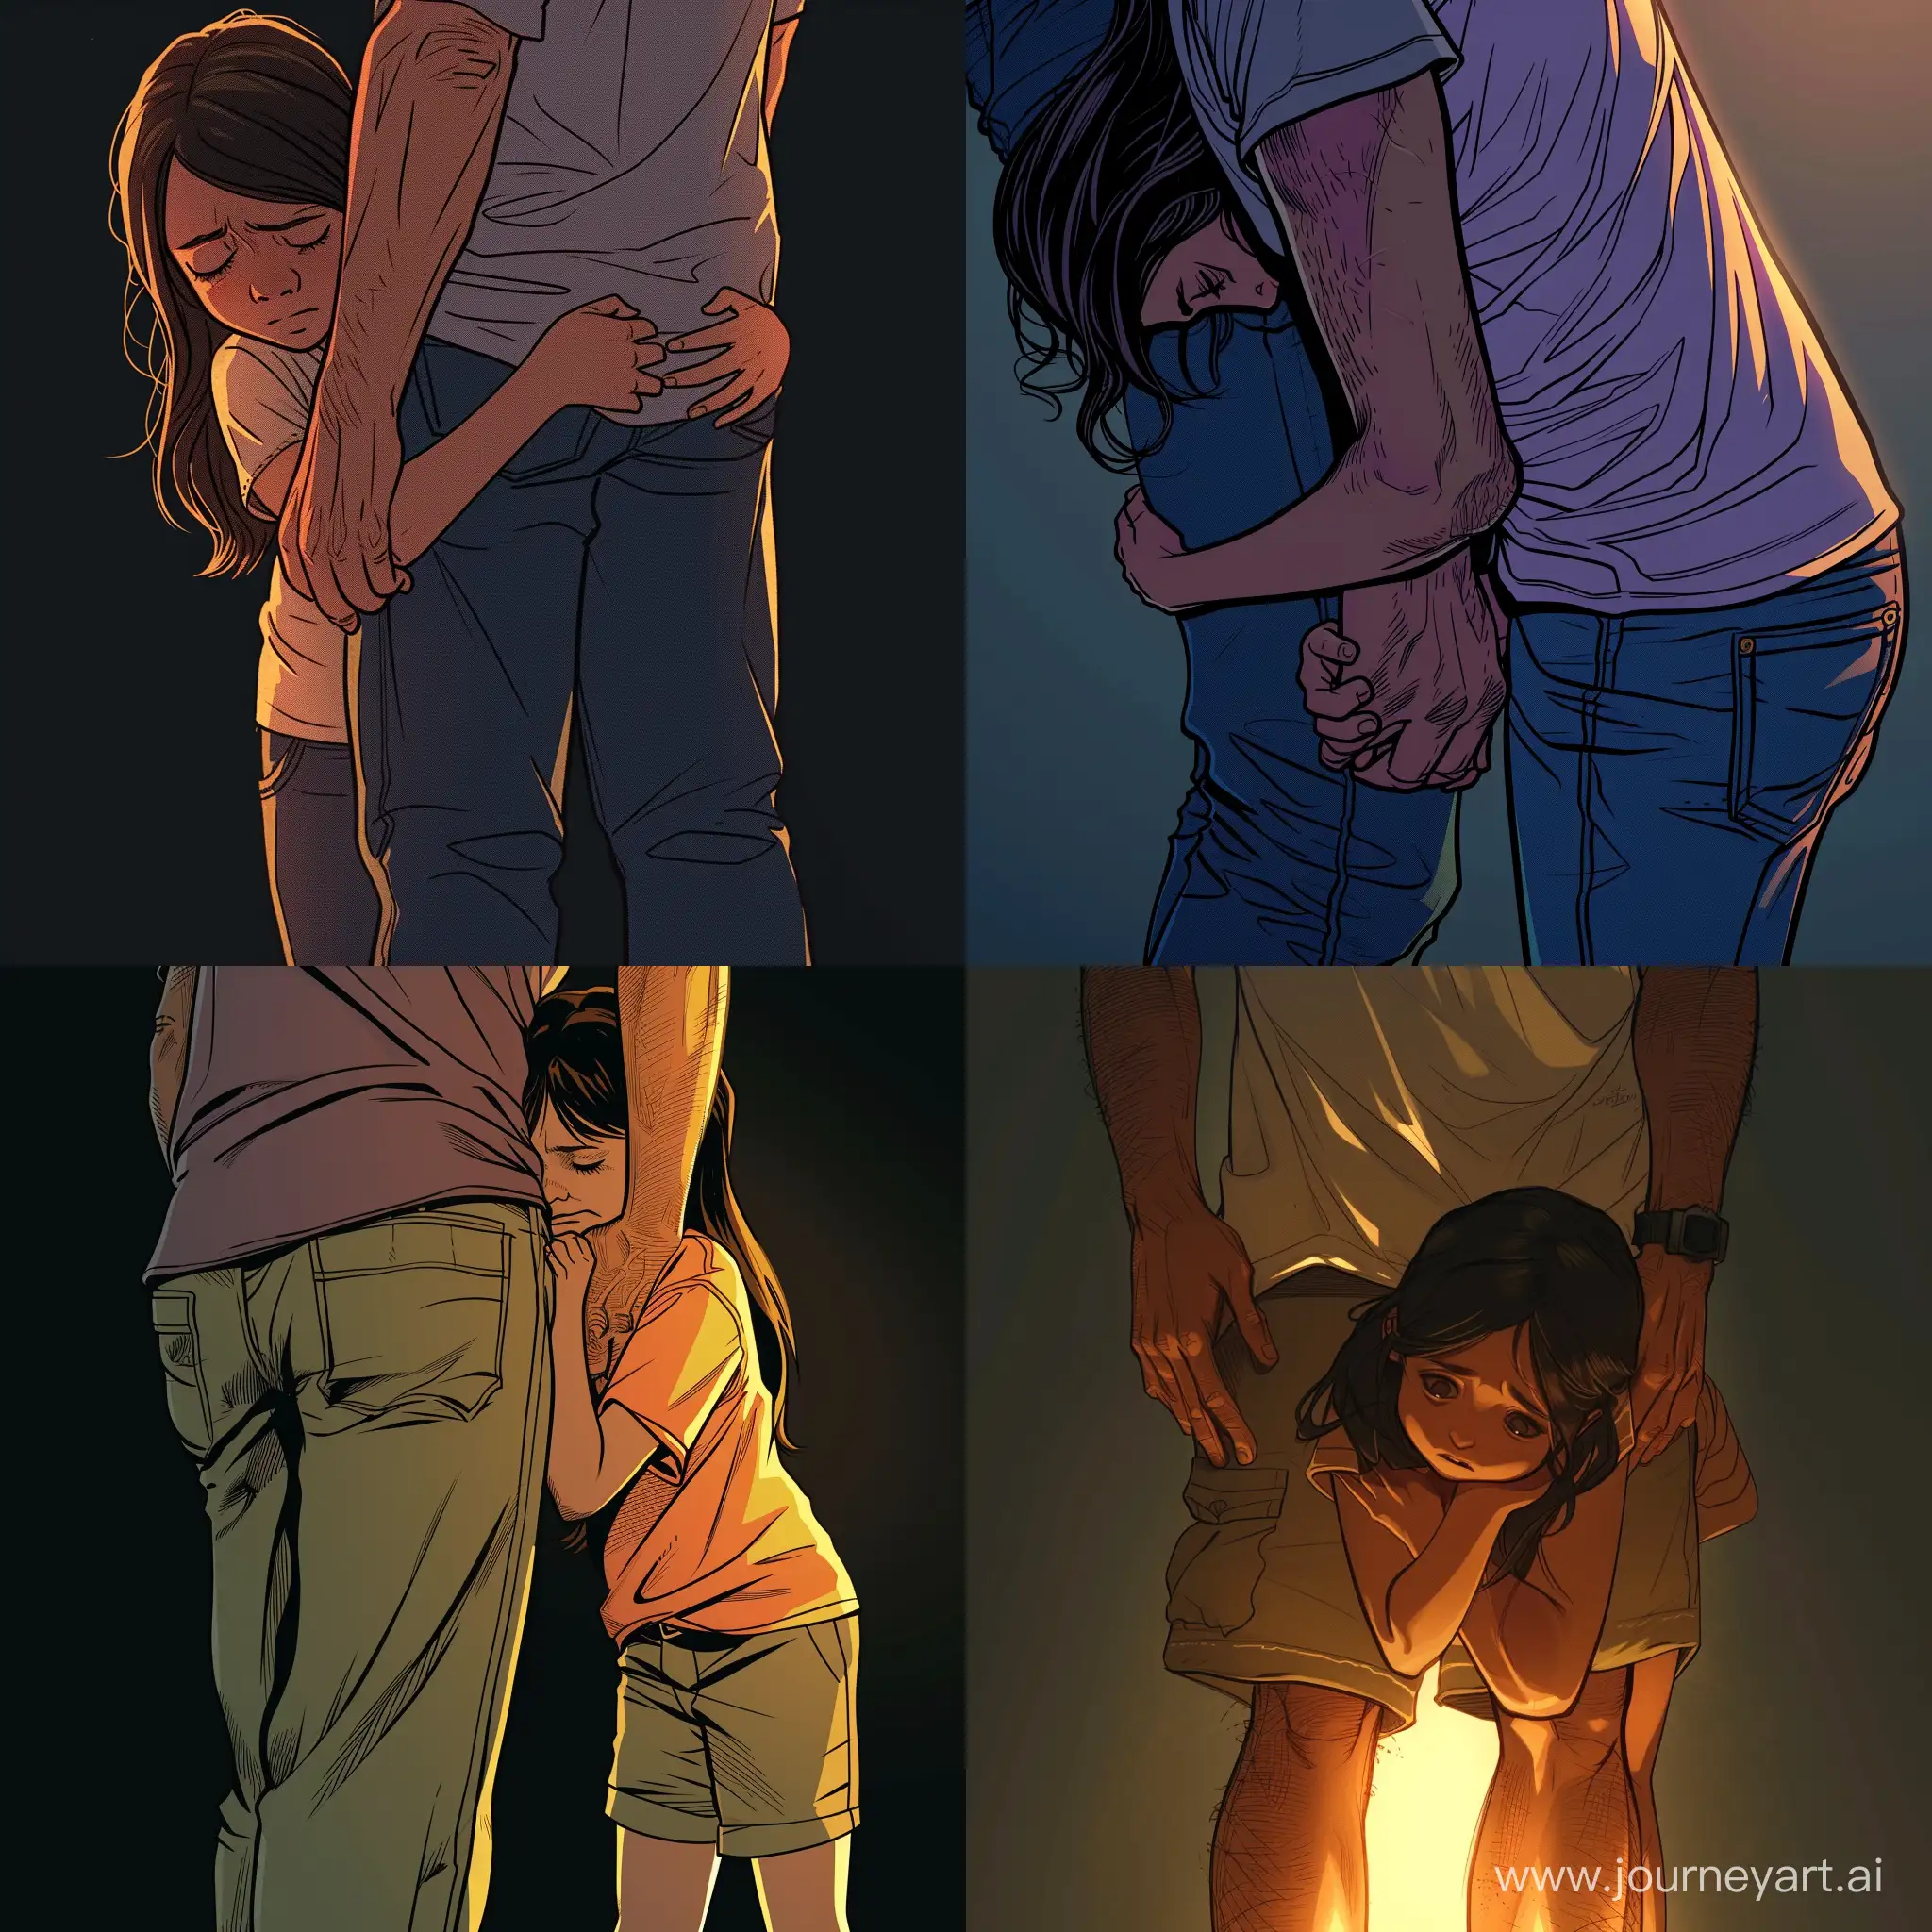 Comforting-Daughter-Clings-to-Father-in-Dim-Light-Modern-American-Comic-Style